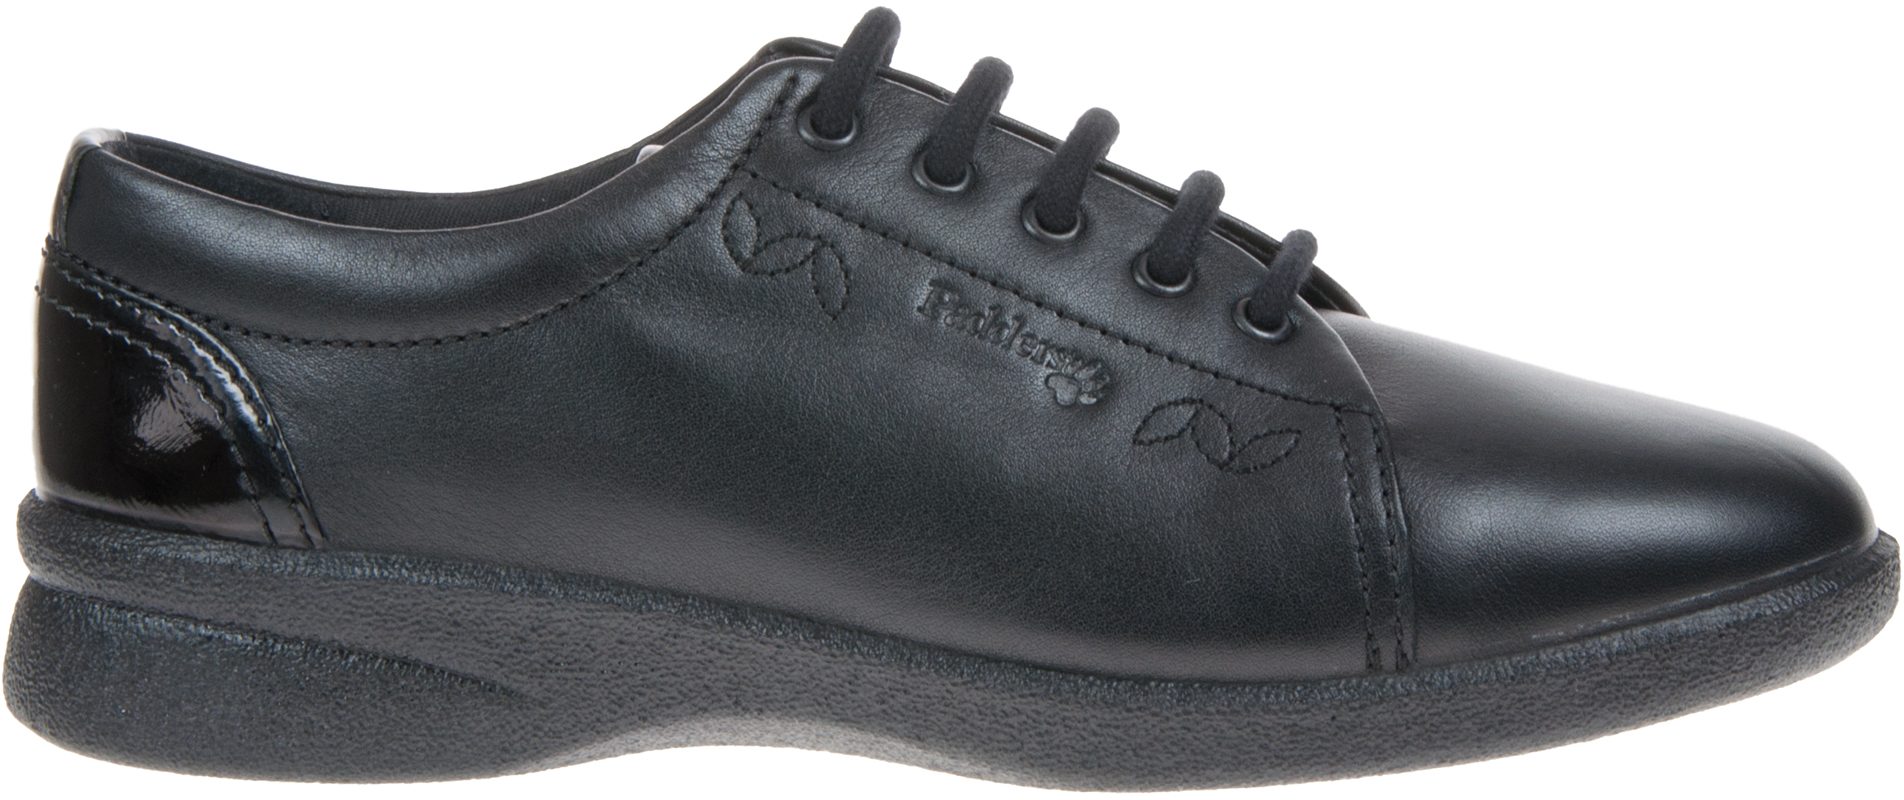 Padders Refresh Black 638N38 - Everyday Shoes - Humphries Shoes